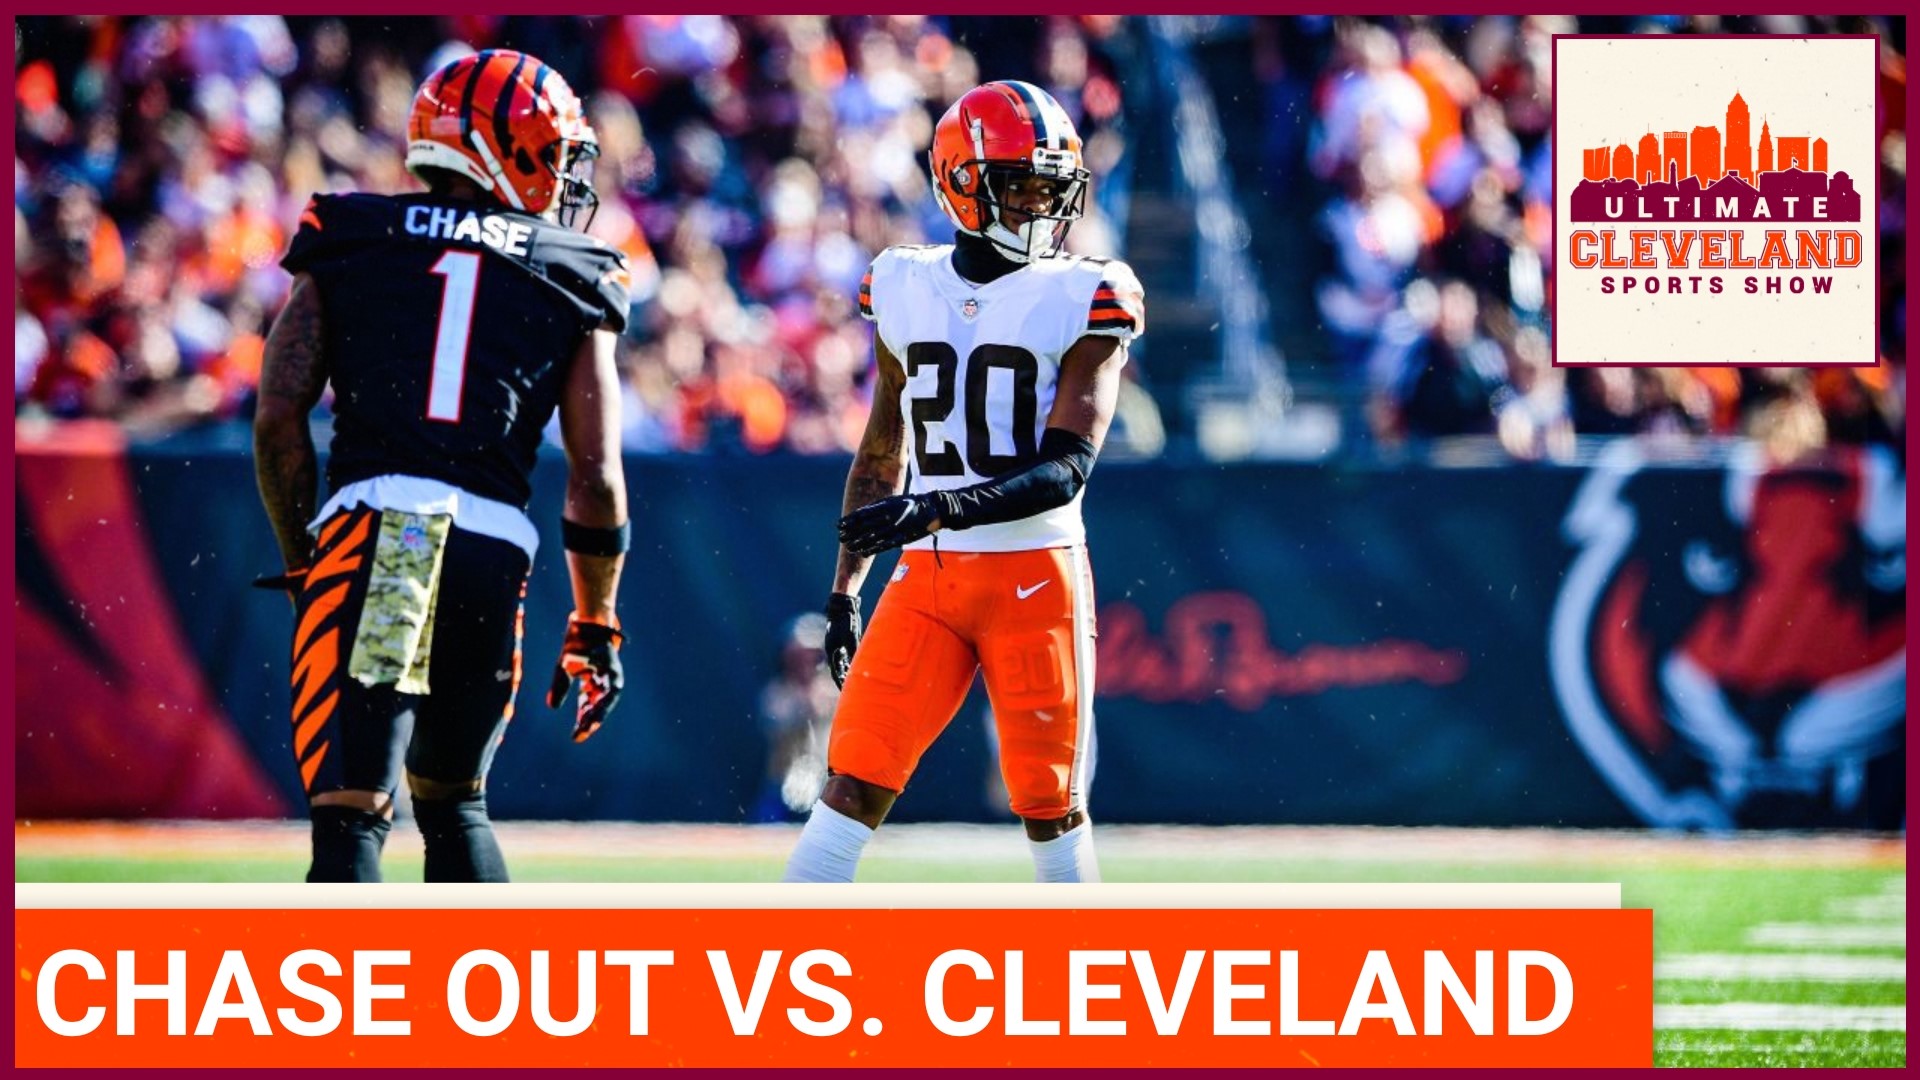 The Cleveland Browns need every advantage possible to beat the Cincinnati Bengals on Monday Night Football, and the home team may have just gotten the biggest break